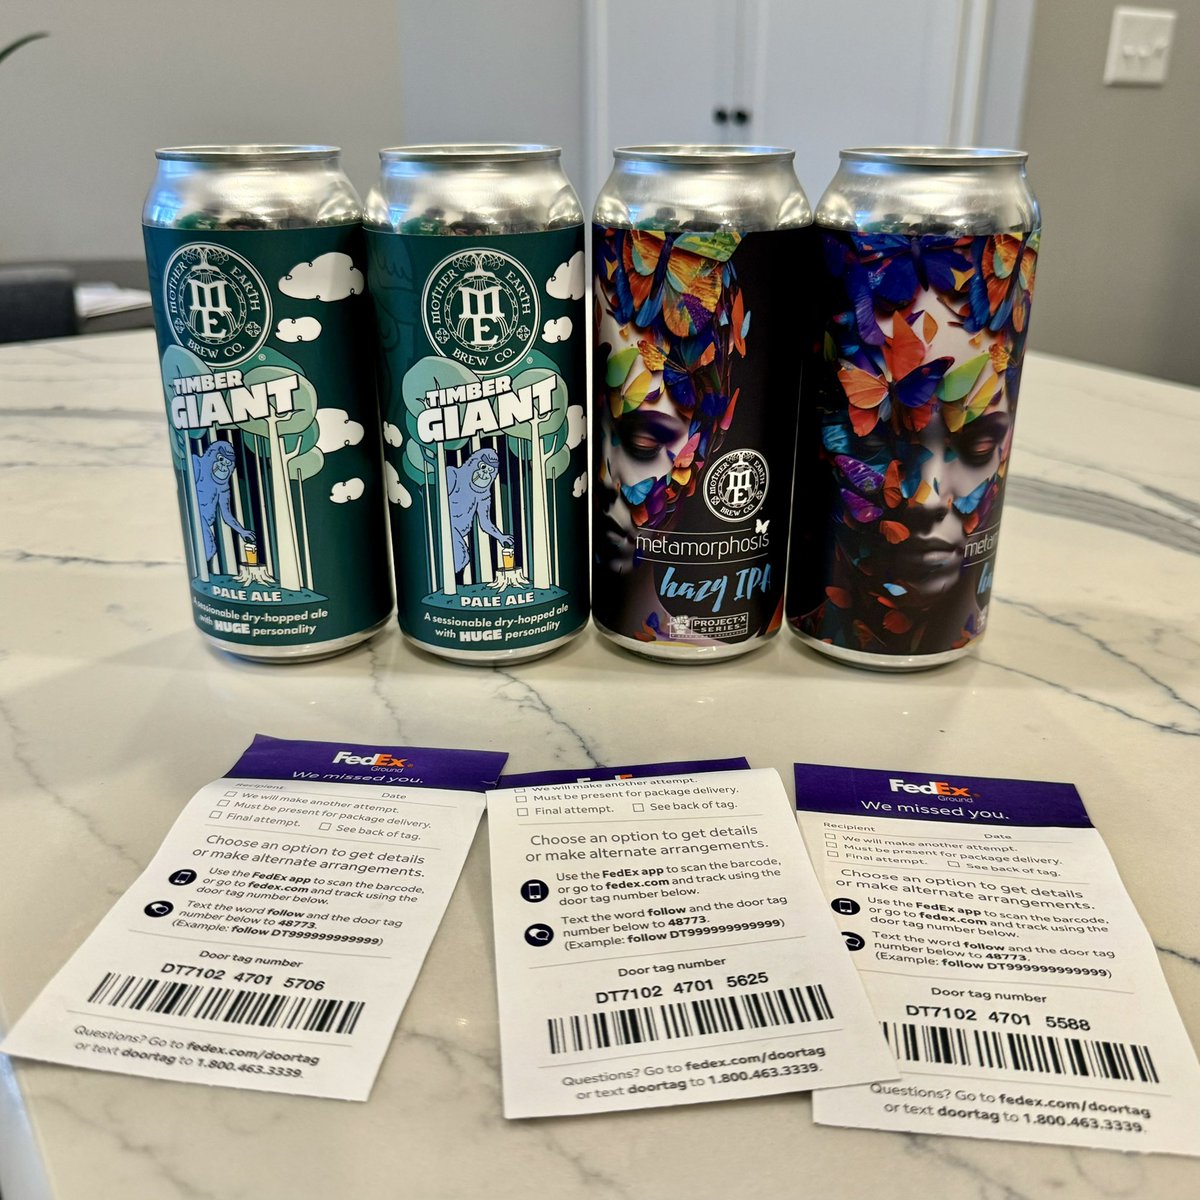 It only took a week of missed FedEx connections, BUT finally, MOMEARF ARRIVED! 📦 I love these people. I love this brand. I love this…Read more -> hopsmash.com #motherearthbrewco #sdbeer #sdcraftbeer #vistabeer @MotherEarthBrCo